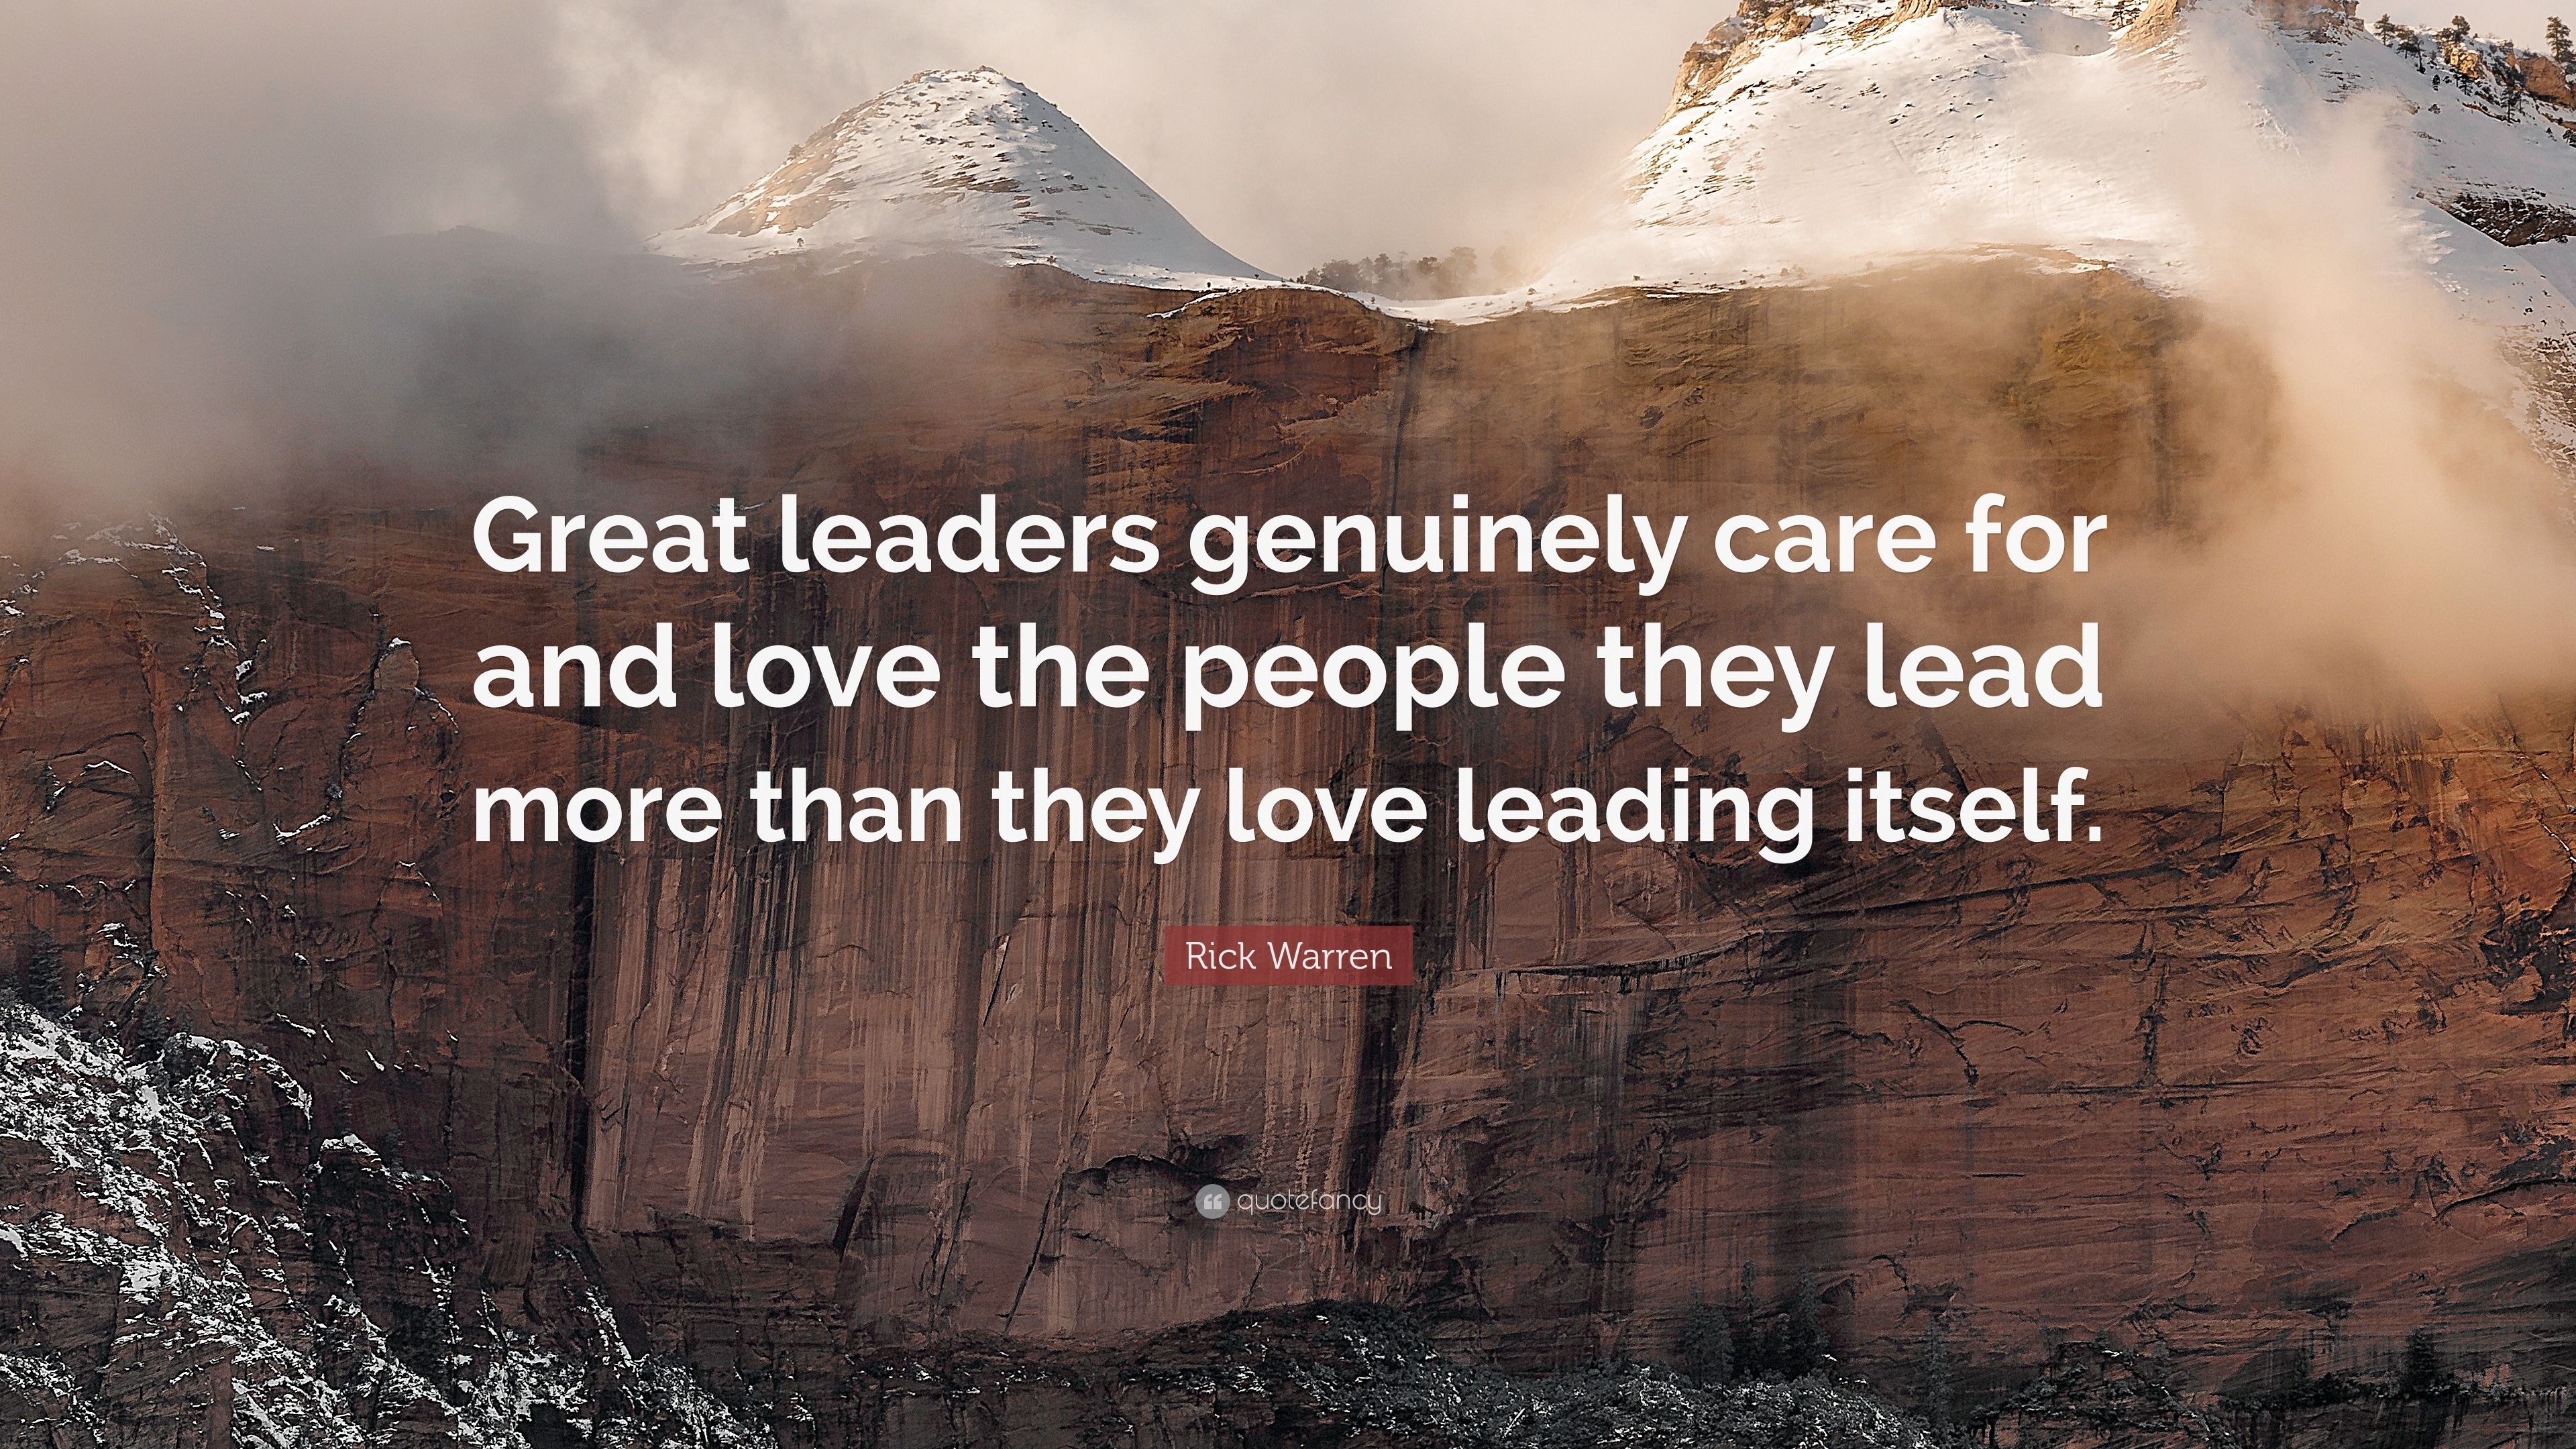 Rick Warren Quote: “Great leaders genuinely care for and love the